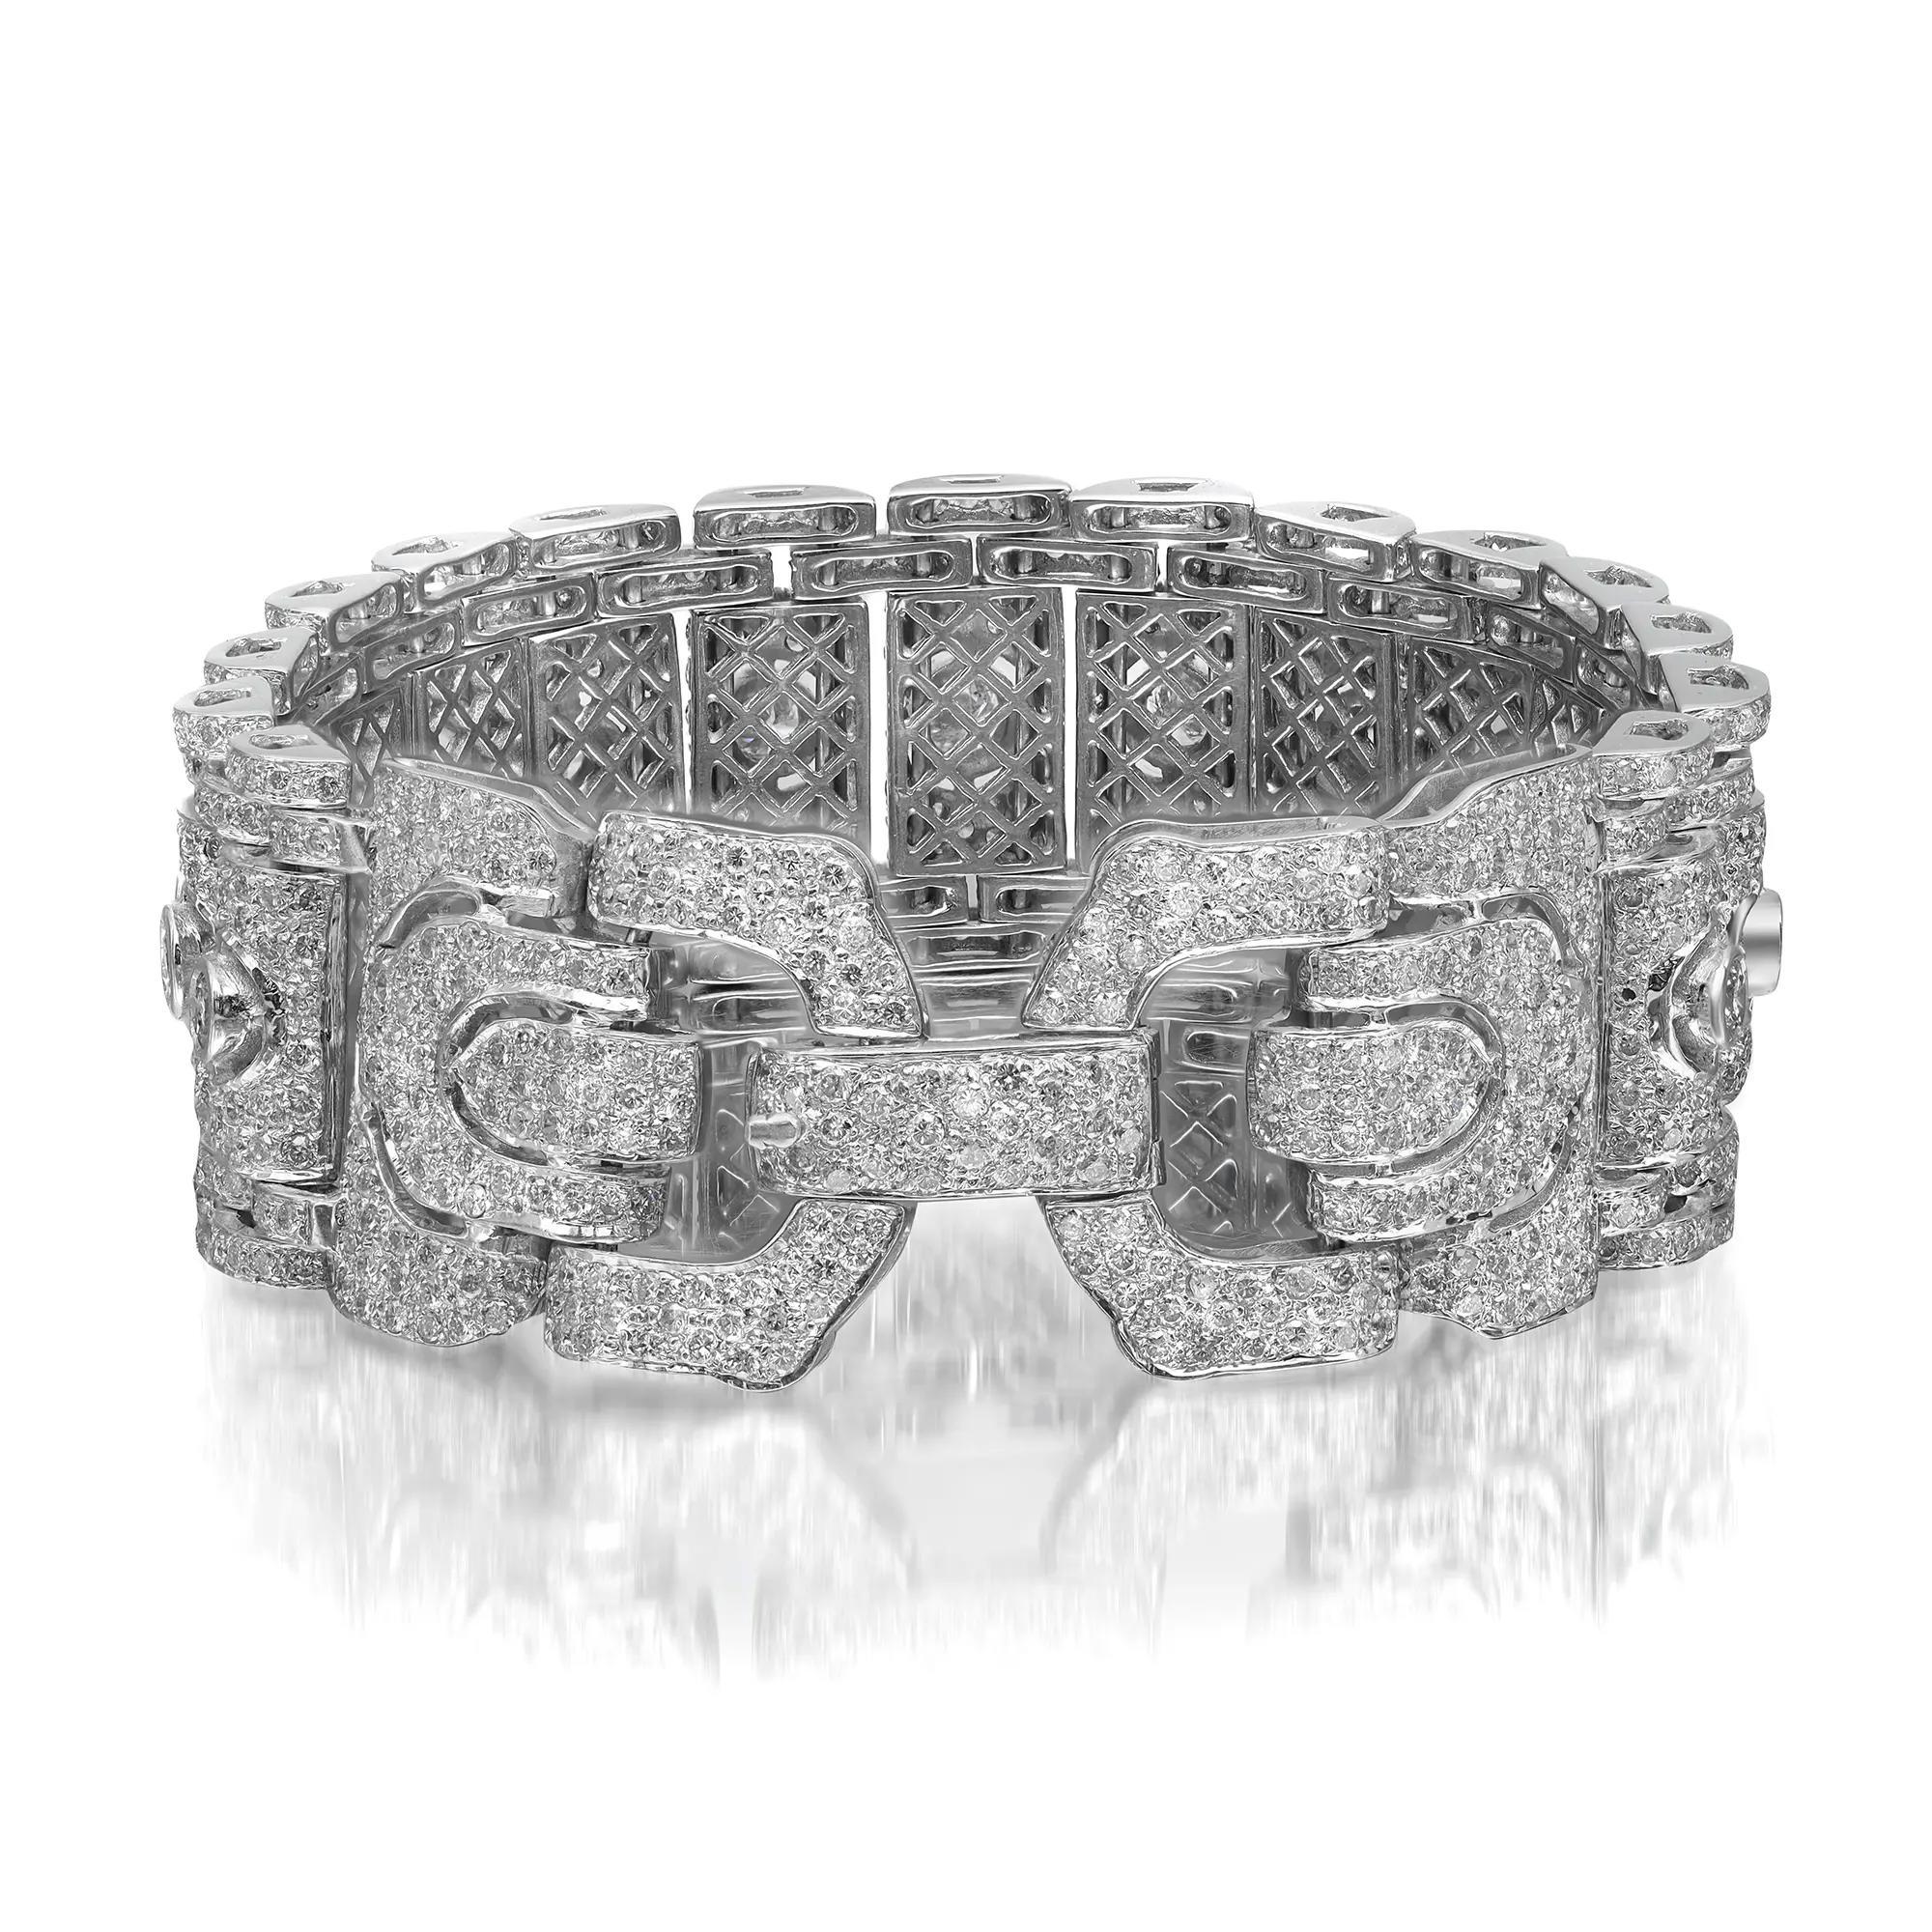 Beautiful and dazzling, this antique diamond bracelet is surely a stunner. Crafted in 18K white gold. This bracelet features 15 round brilliant cut diamonds in the center in a bezel setting with small diamonds set all over the bracelet in pave